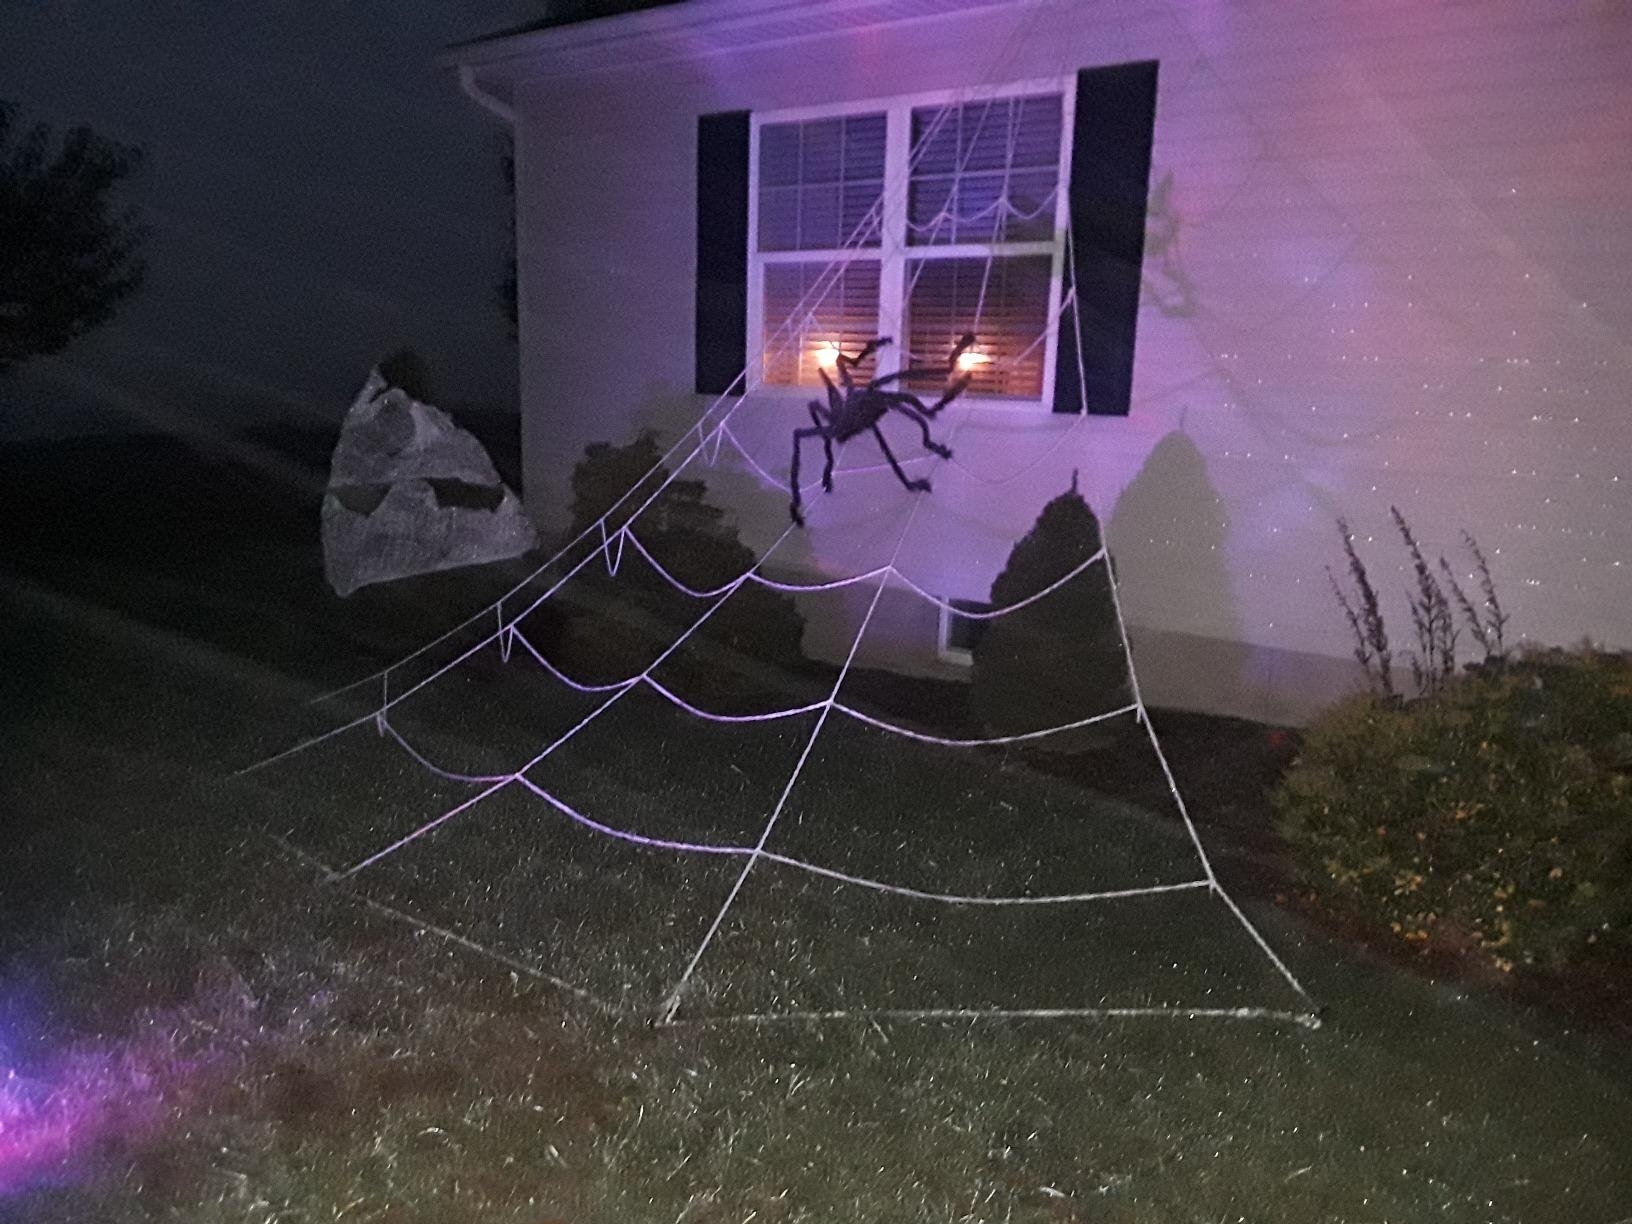 Reviewer image of the spider web on the side of their house